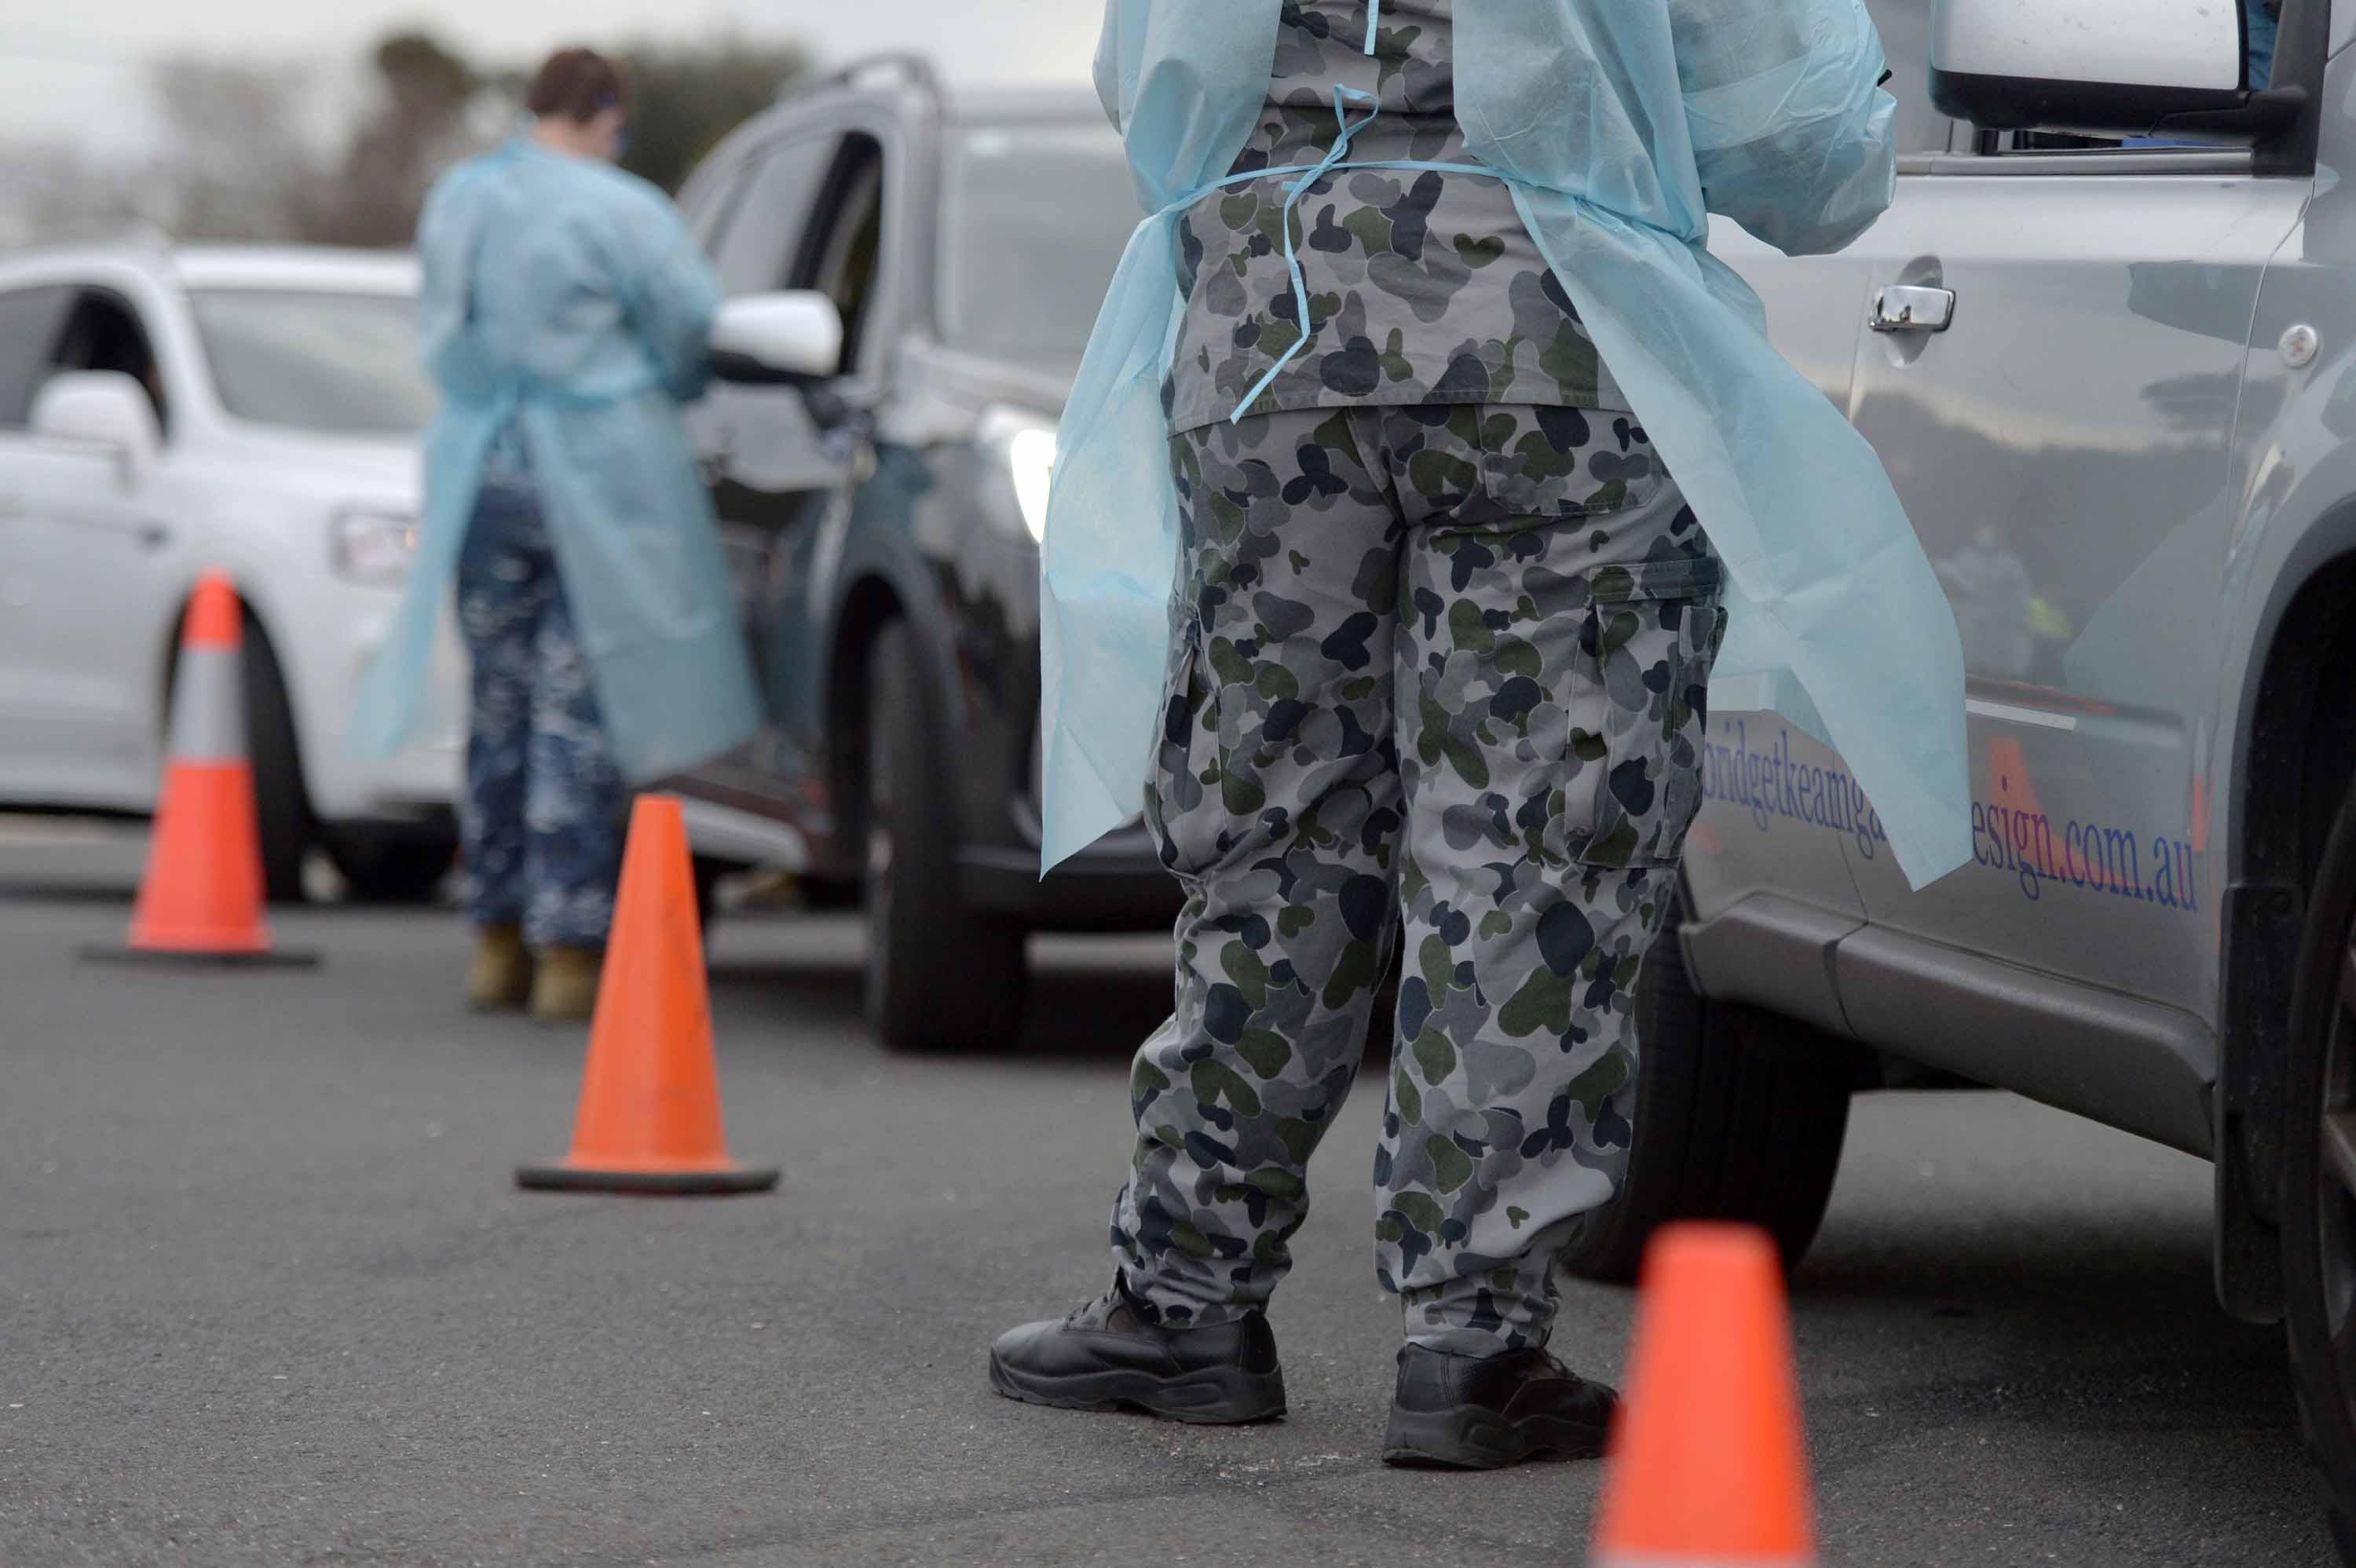 Members of the Australian Defence Force (ADF) gather information and conduct temperature checks at a drive-in Covid-19 testing site in Melbourne, Australia, on Tuesday, June 30.